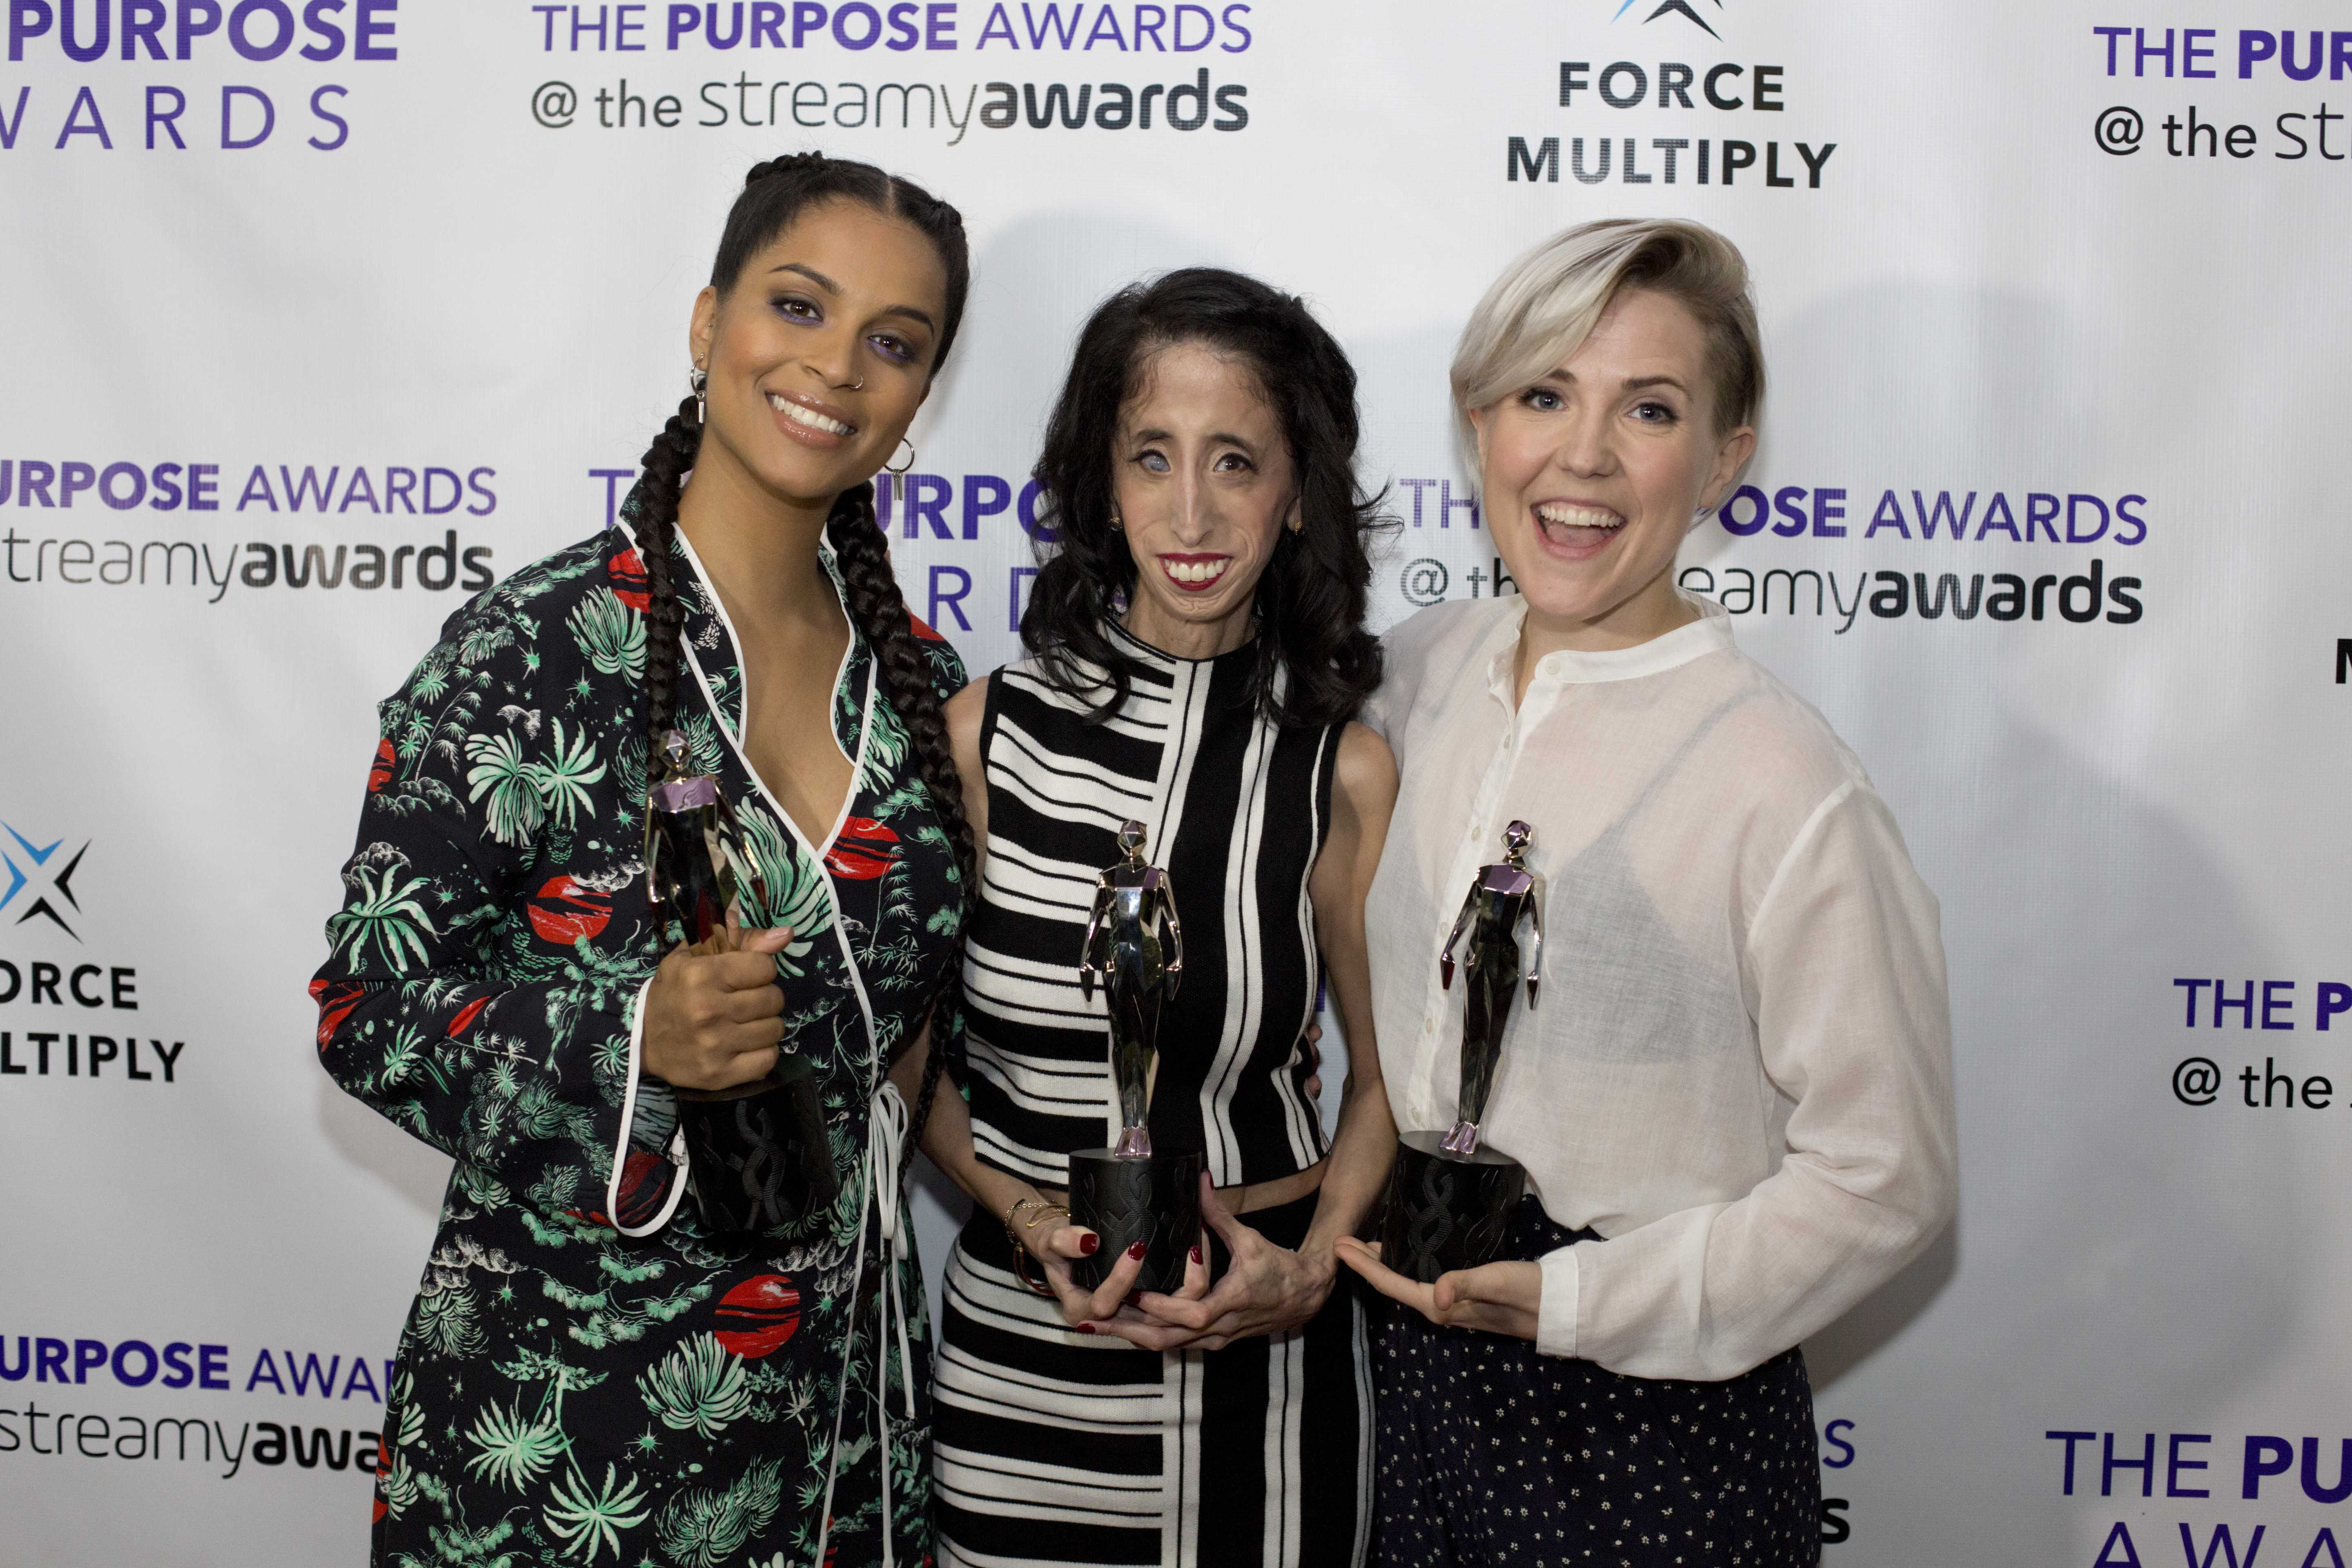 Picture shows Lilly Singh, Lizzy Velasquez and Hannah Hart, at the Purpose Awards @thestreamys, LA Live in Downtown Los Angeles.